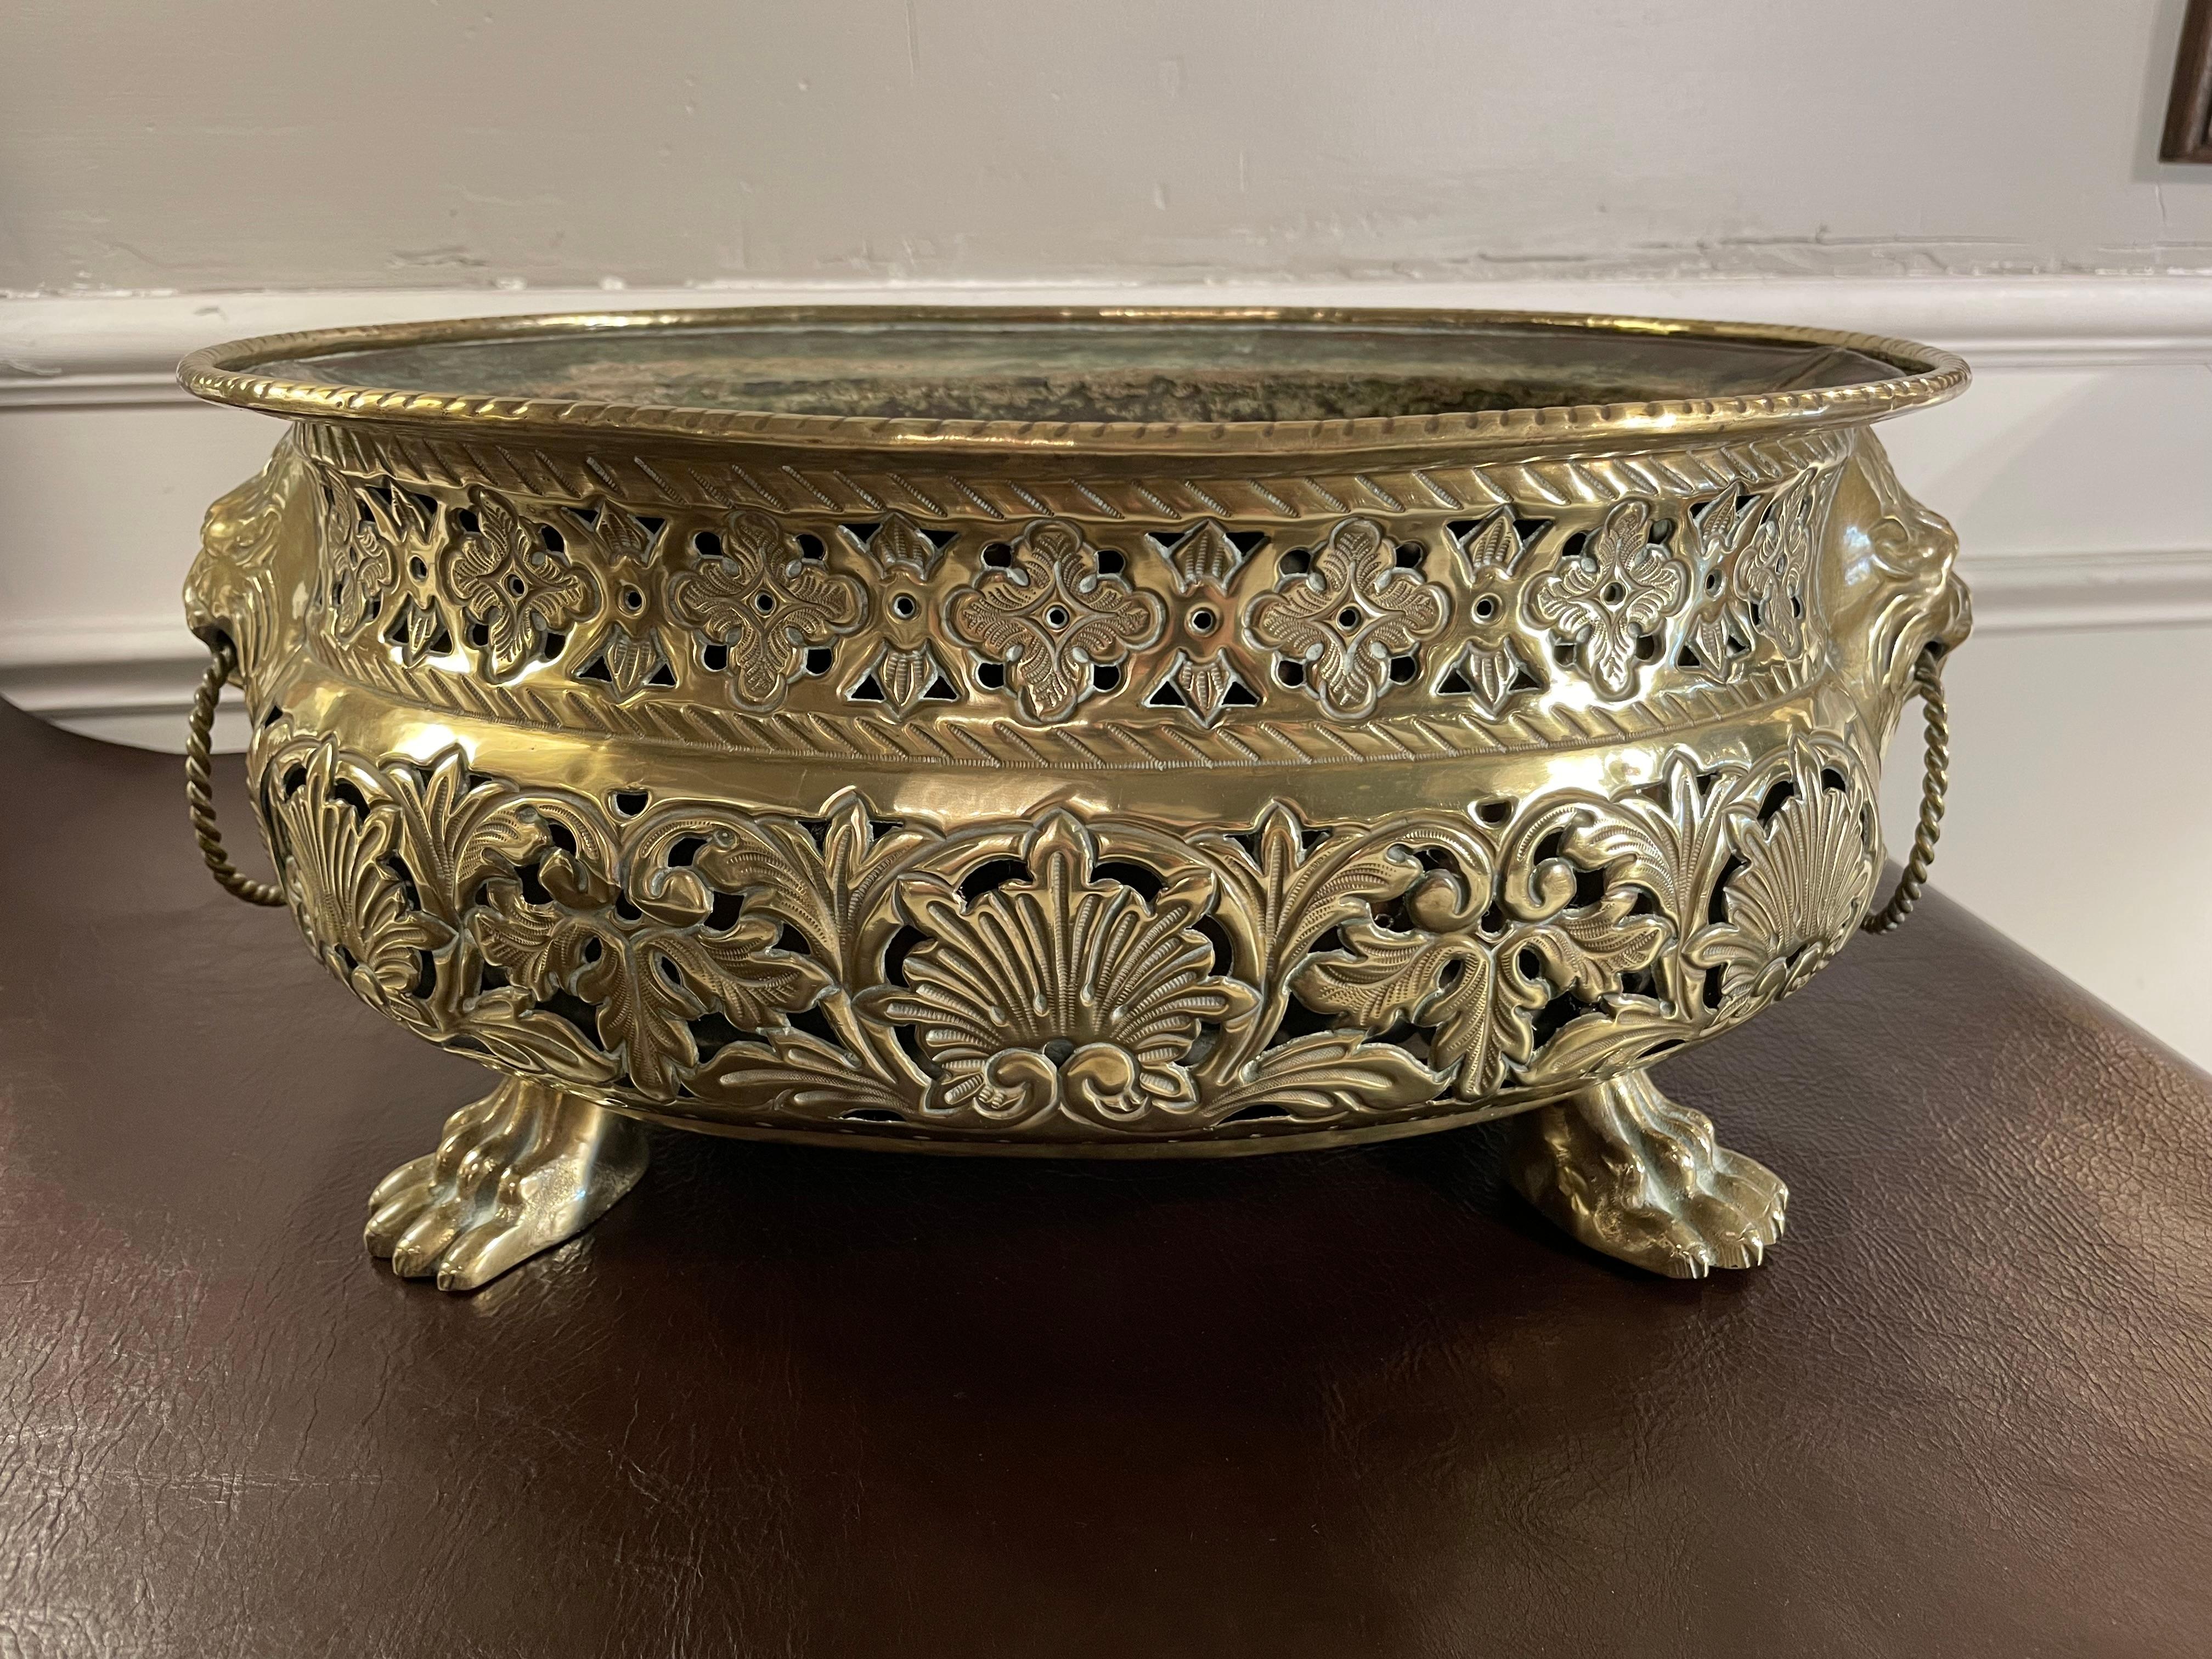 Dutch Baroque style brass table top planter or jardiniere with pierced fretwork and hammered repousse decoration of shell and floral motifs with gadrooned rim and borders. Wonderful applied lion heads on each end with twisted rope rings in their